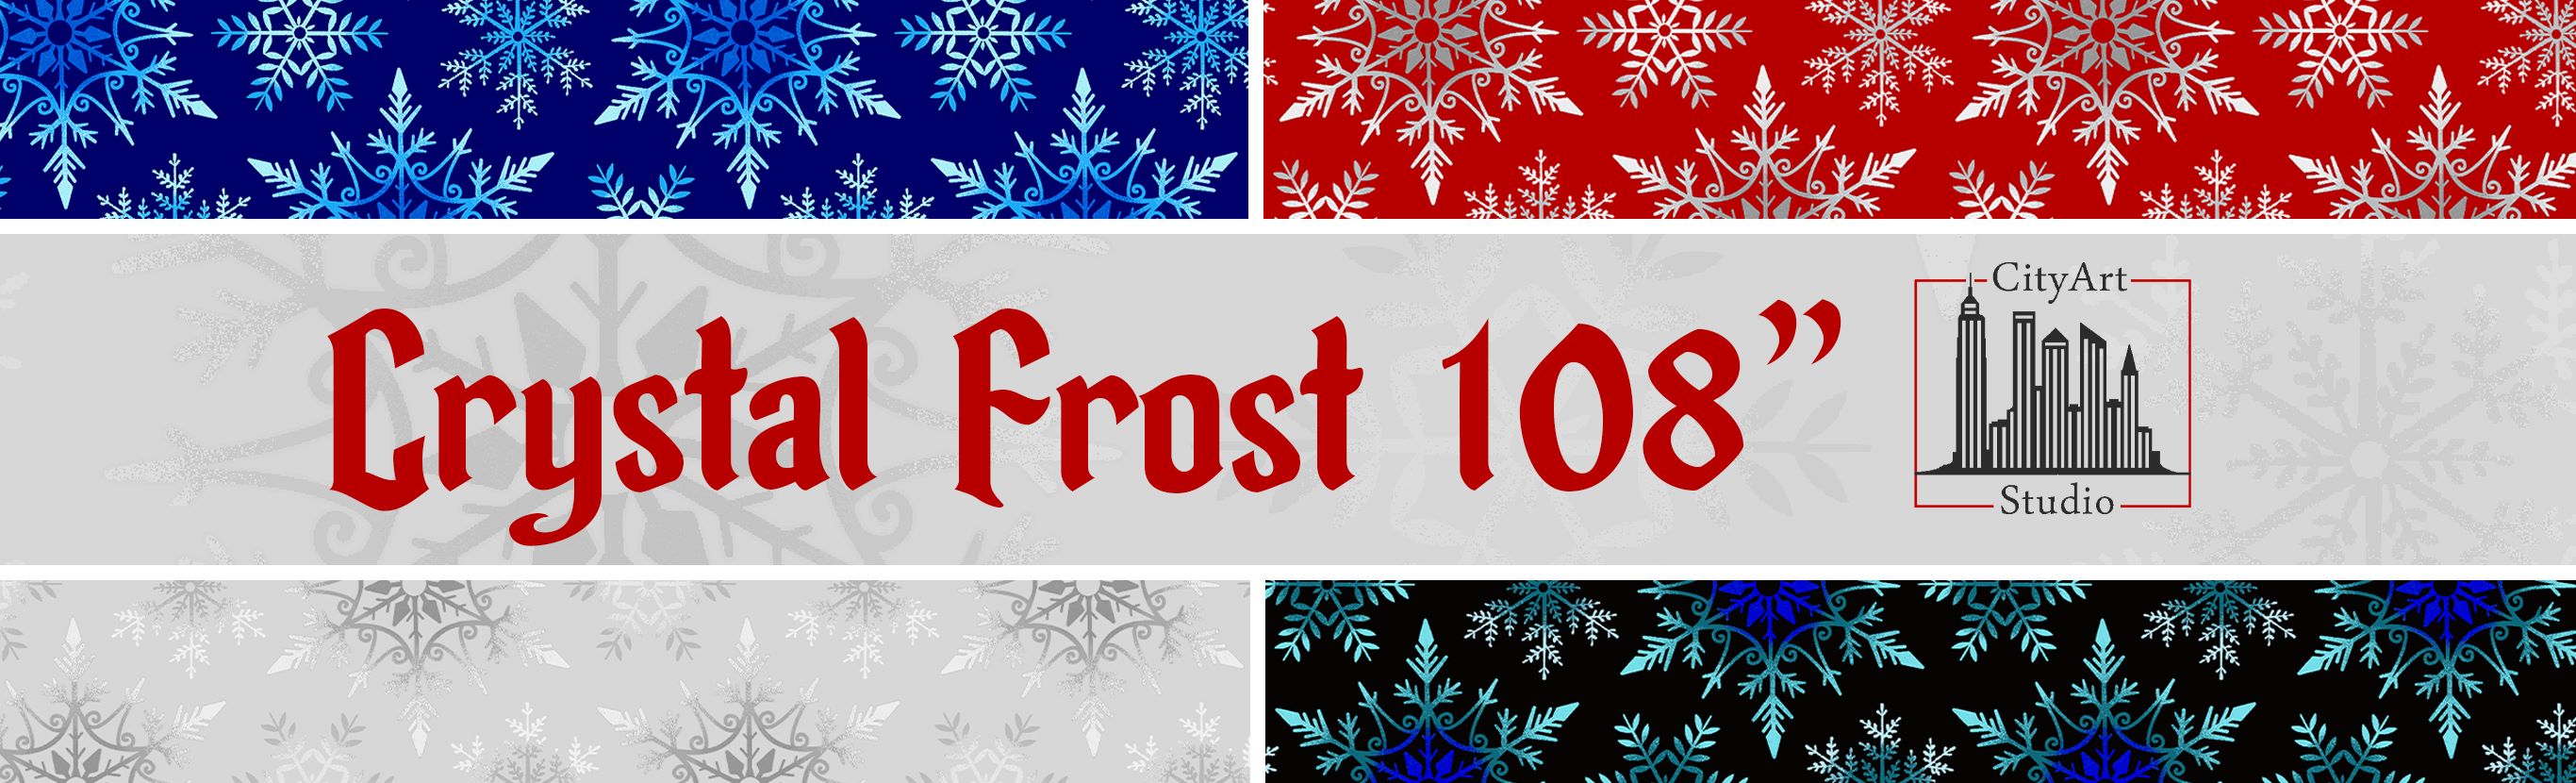 Crystal Frost 108